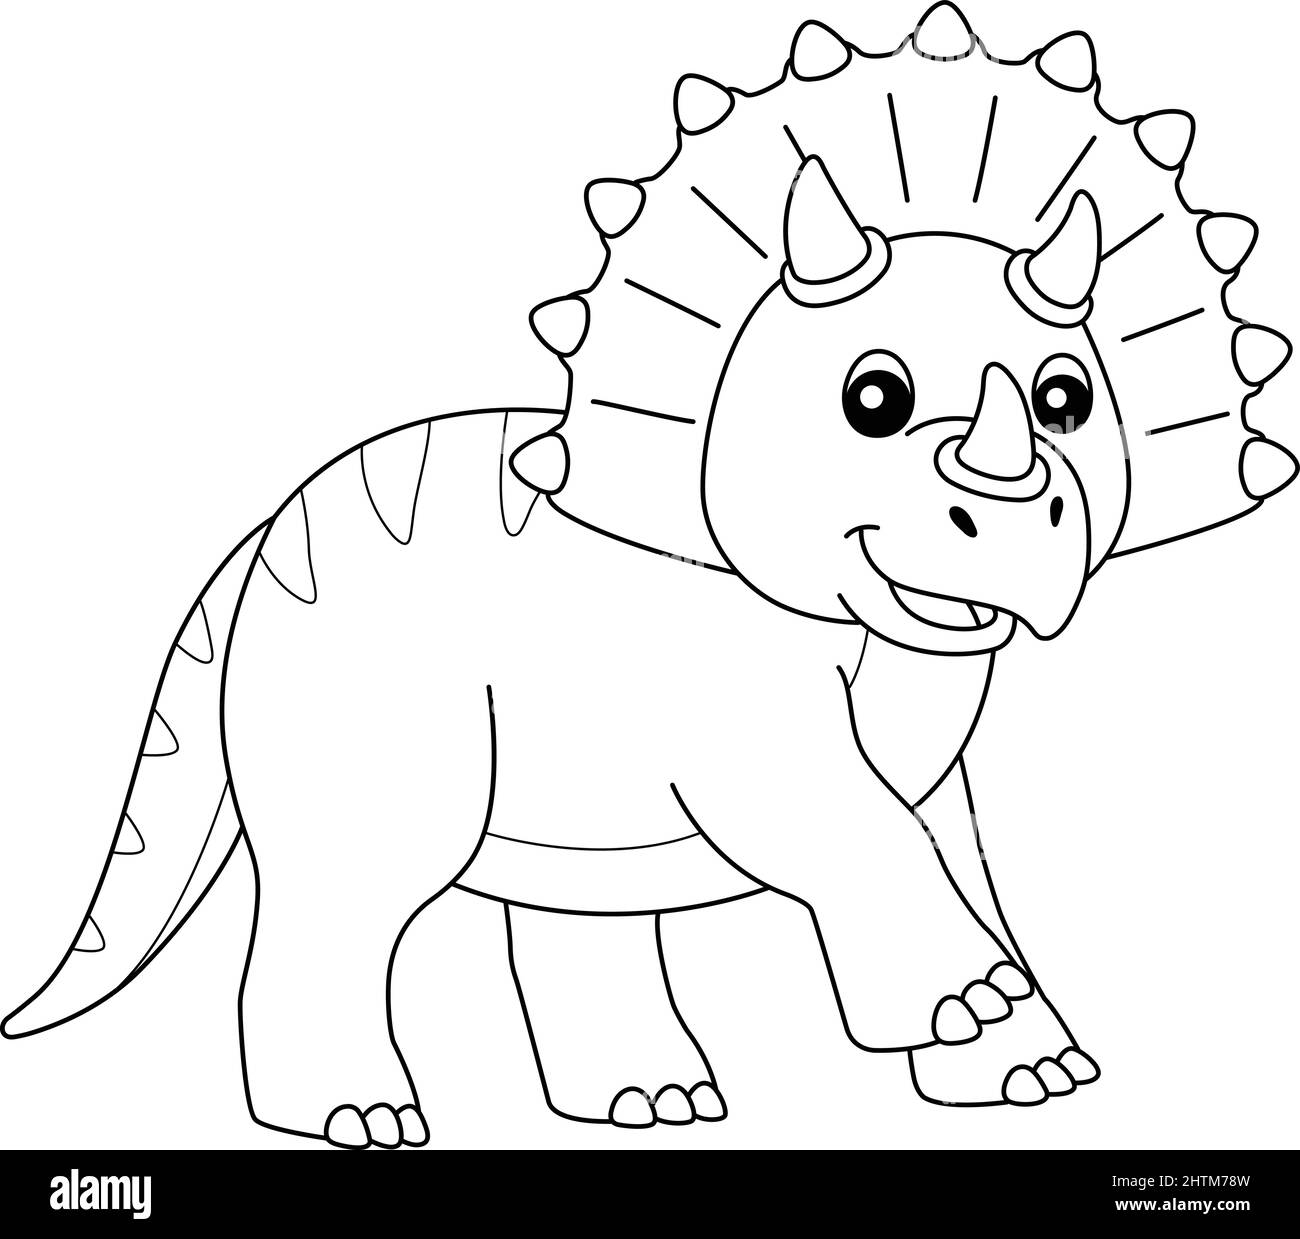 Triceratops Coloring Page Easy Drawing Guides | The Best Porn Website